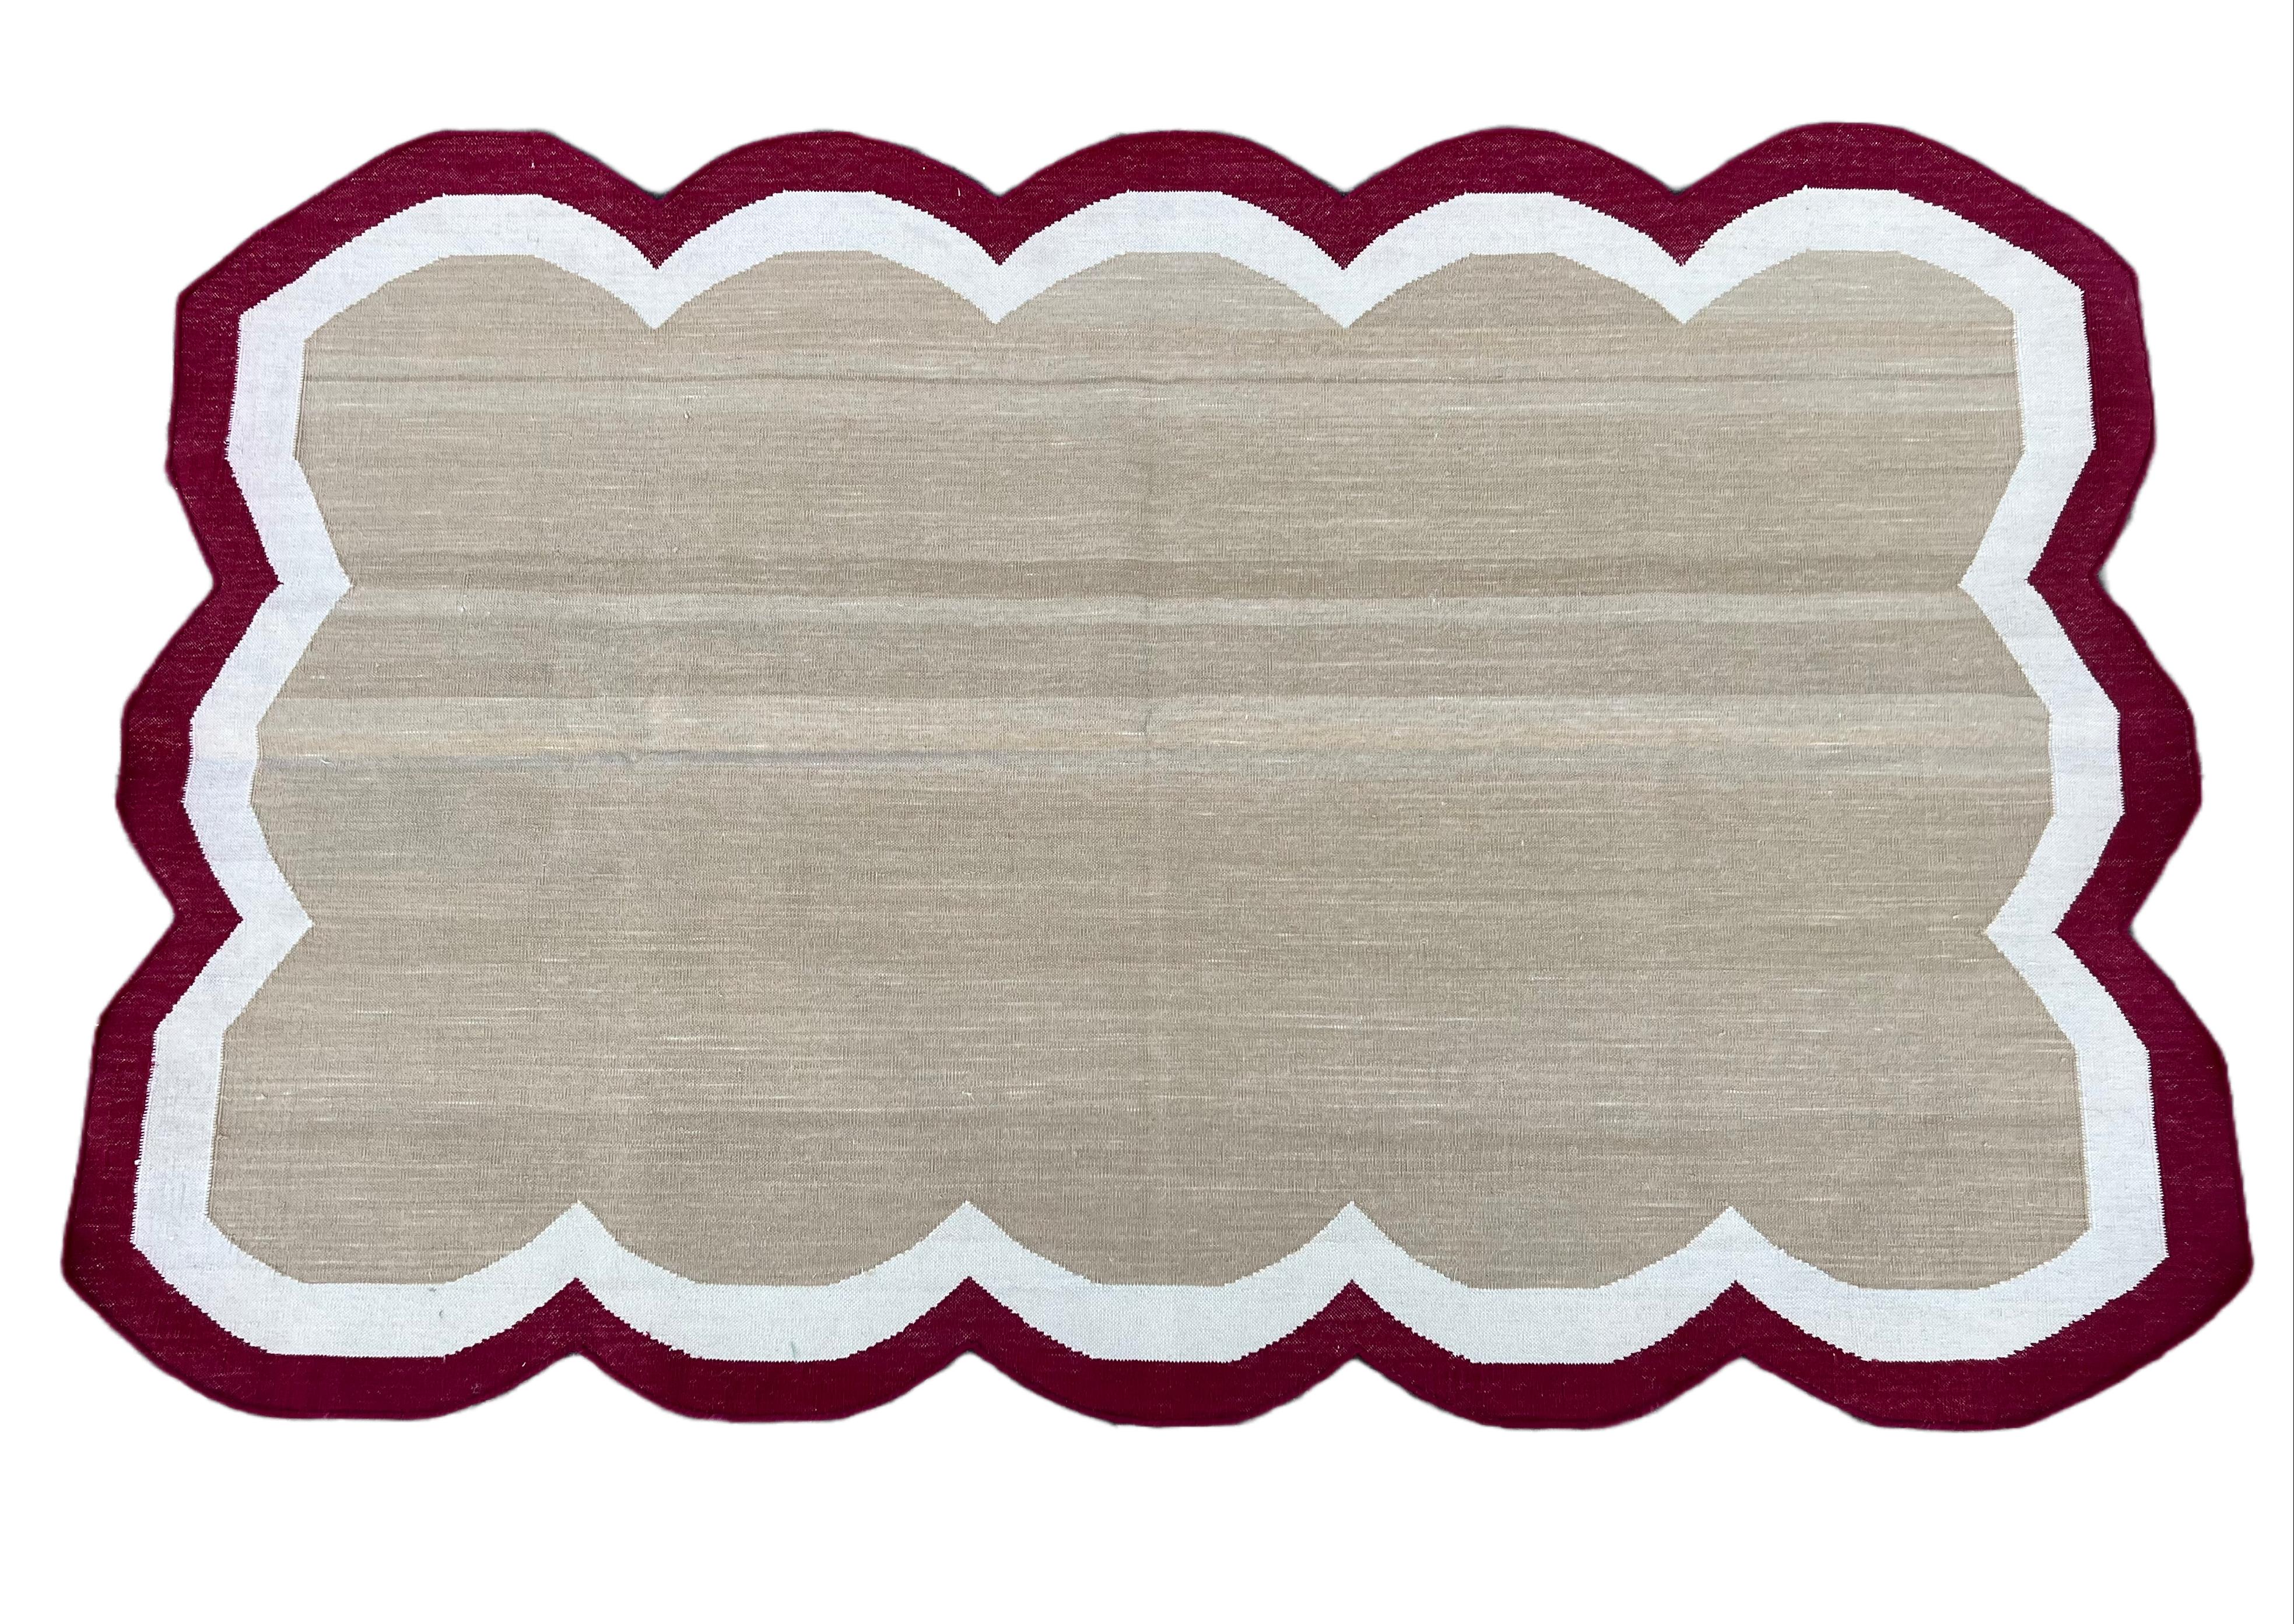 Handmade Cotton Area Flat Weave Rug, 3x5 Beige And Red Scalloped Kilim Dhurrie For Sale 2